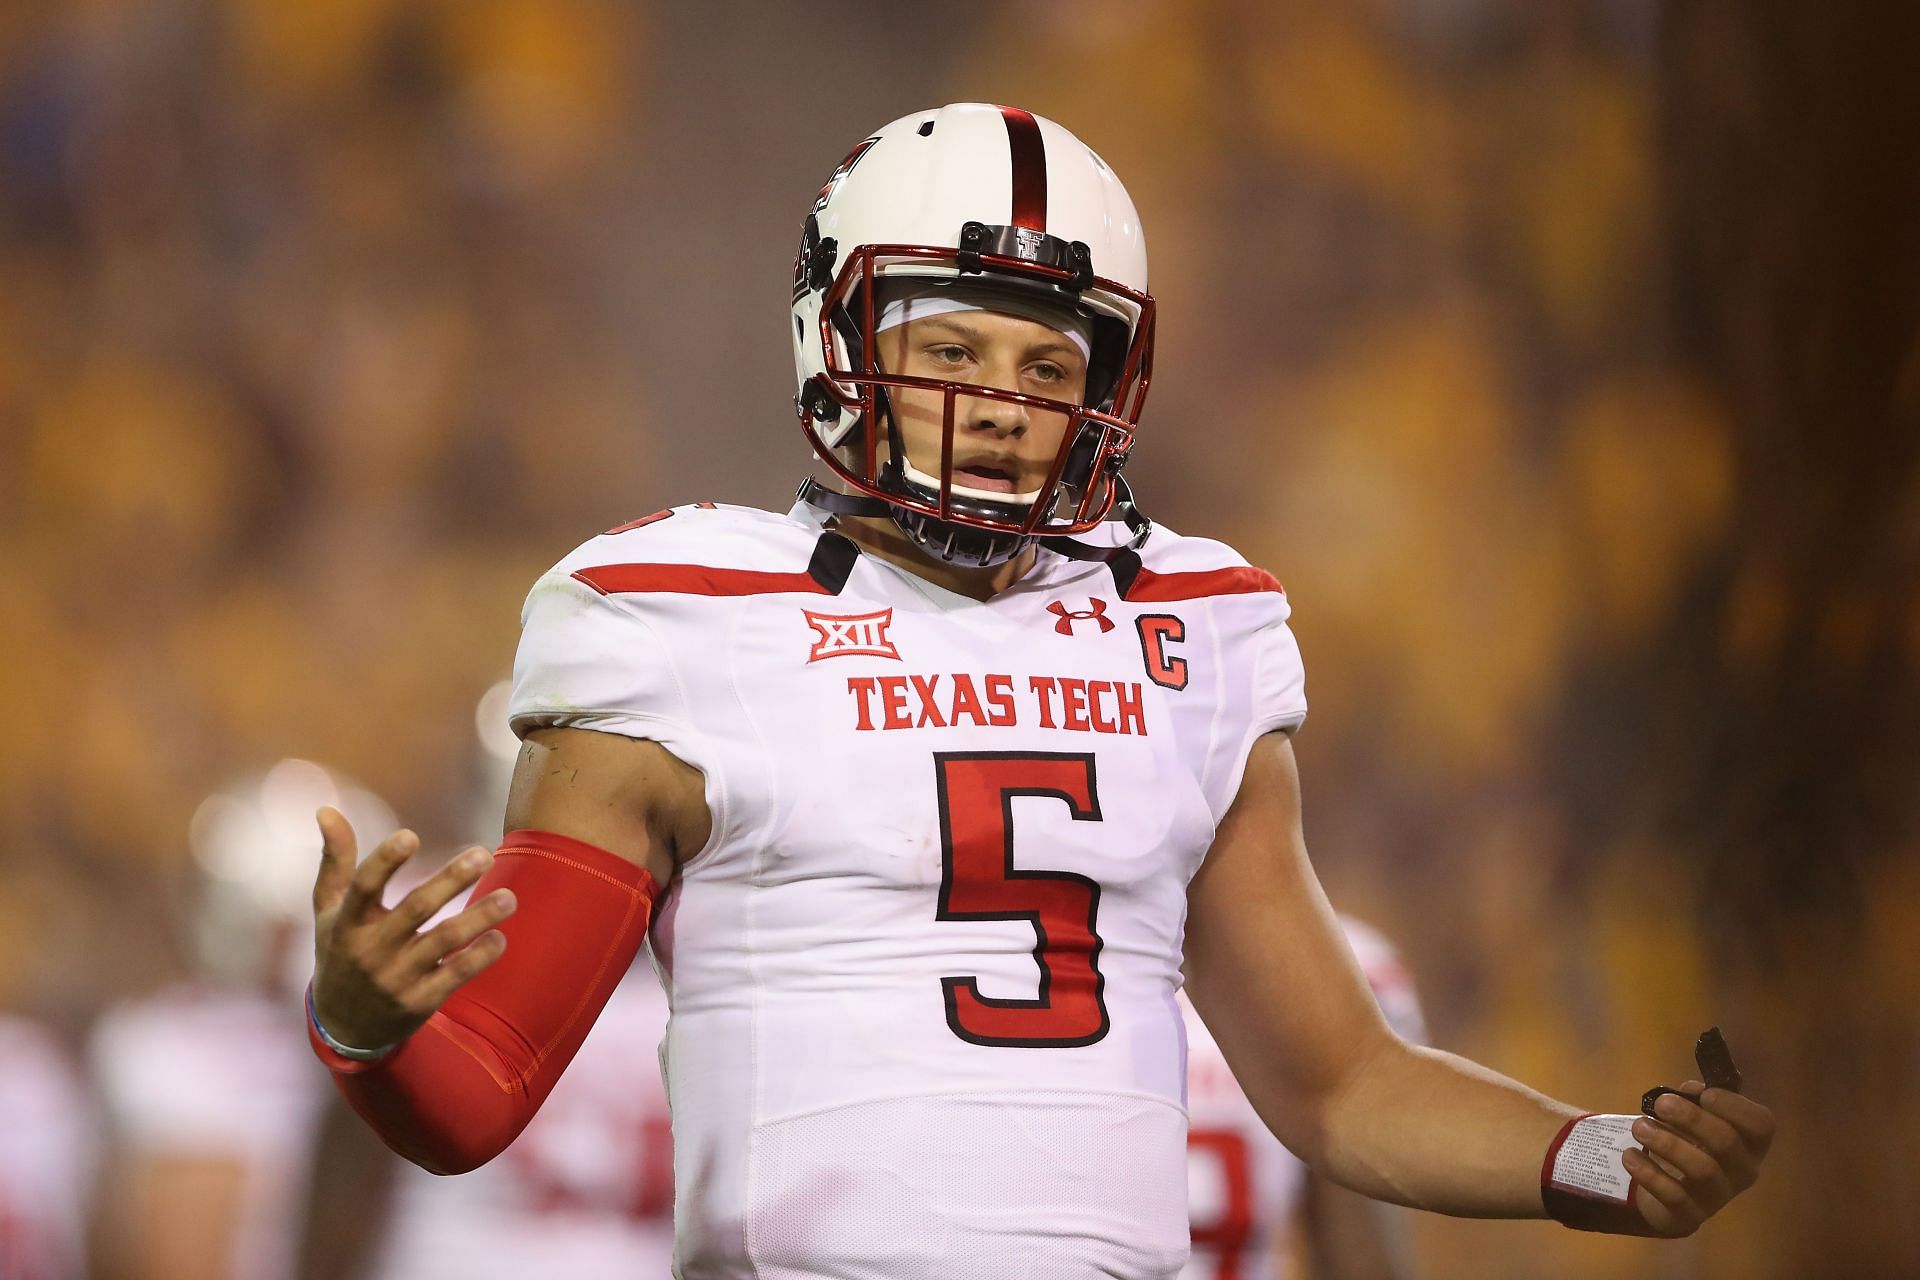 Mahomes opted to attend Texas Tech University over a draft offer to play baseball for the Detroit Tigers which propelled his football career.